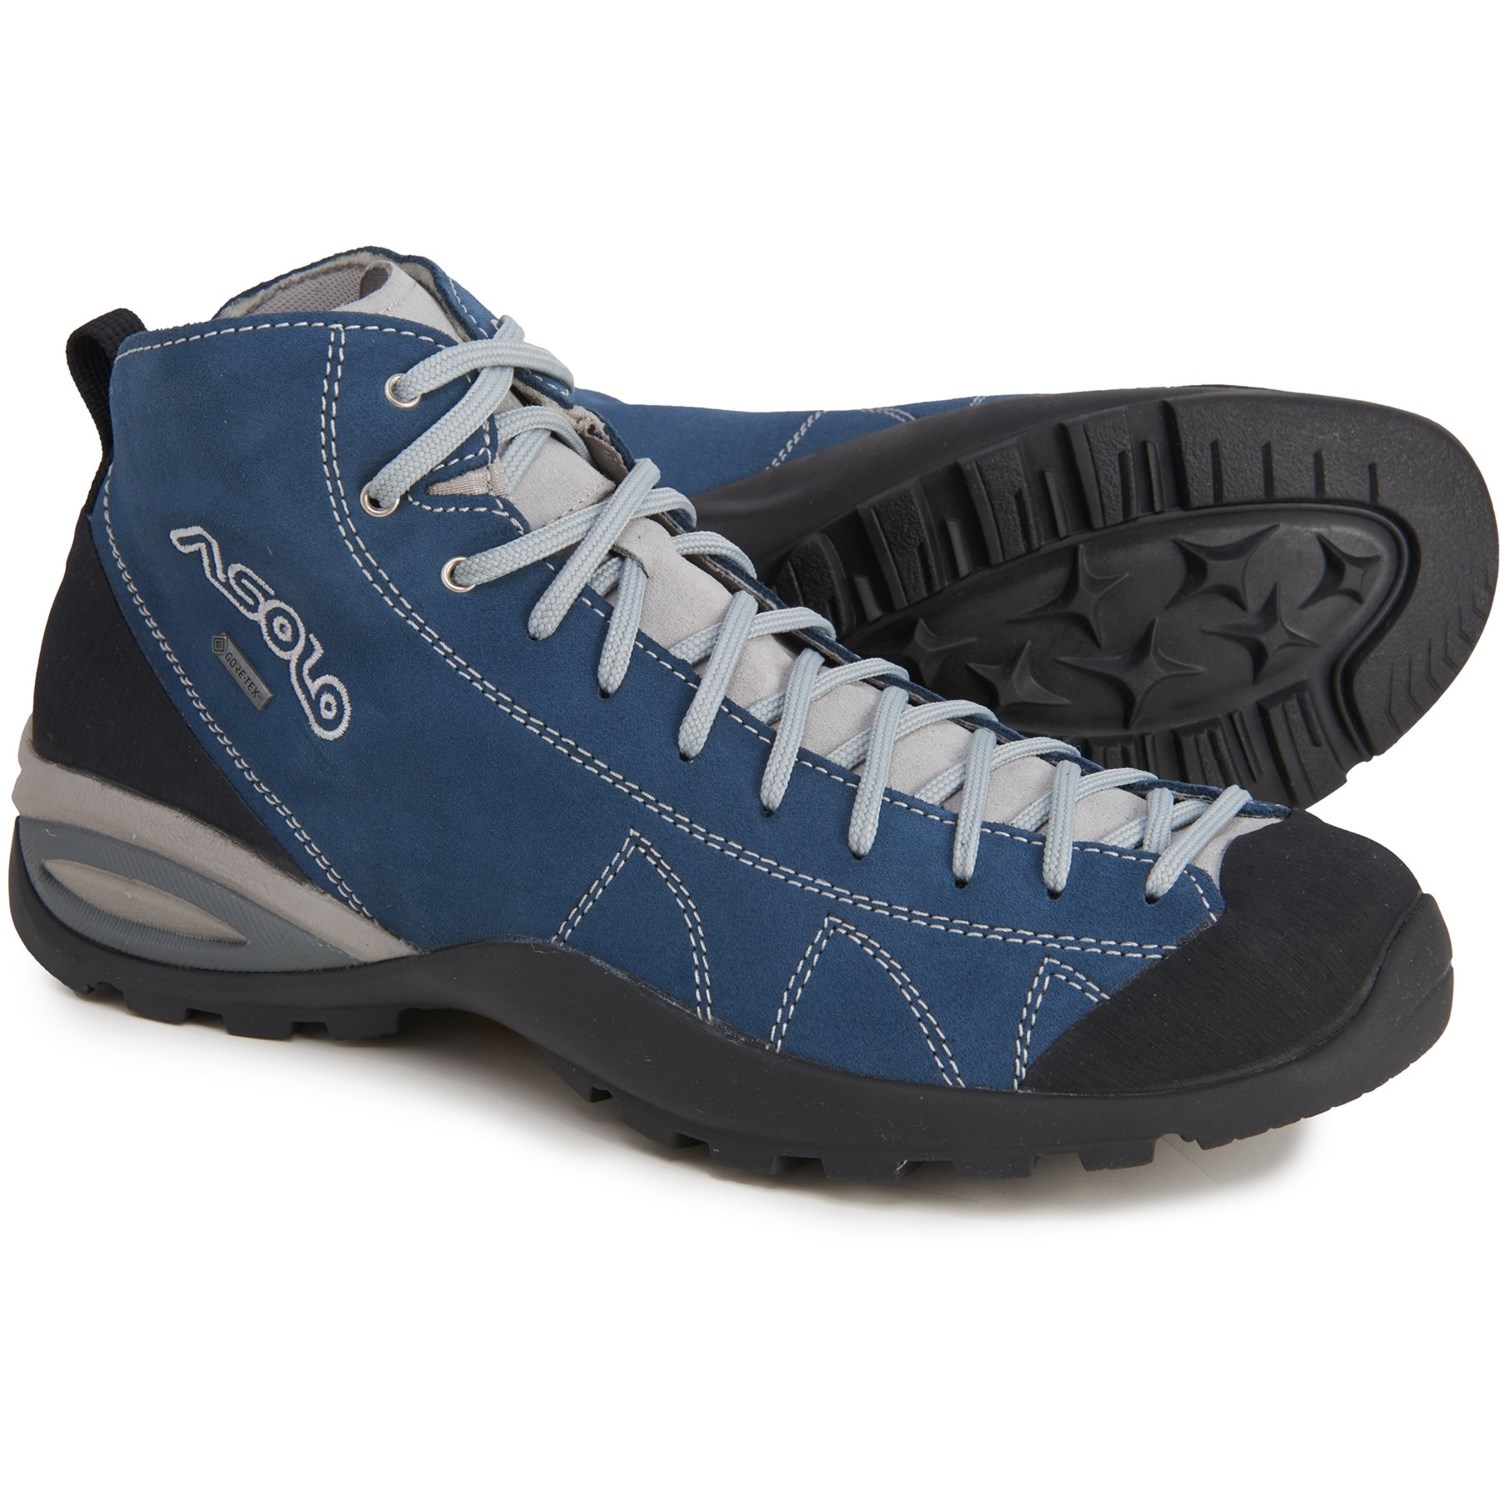 asolo cactus hiking boots